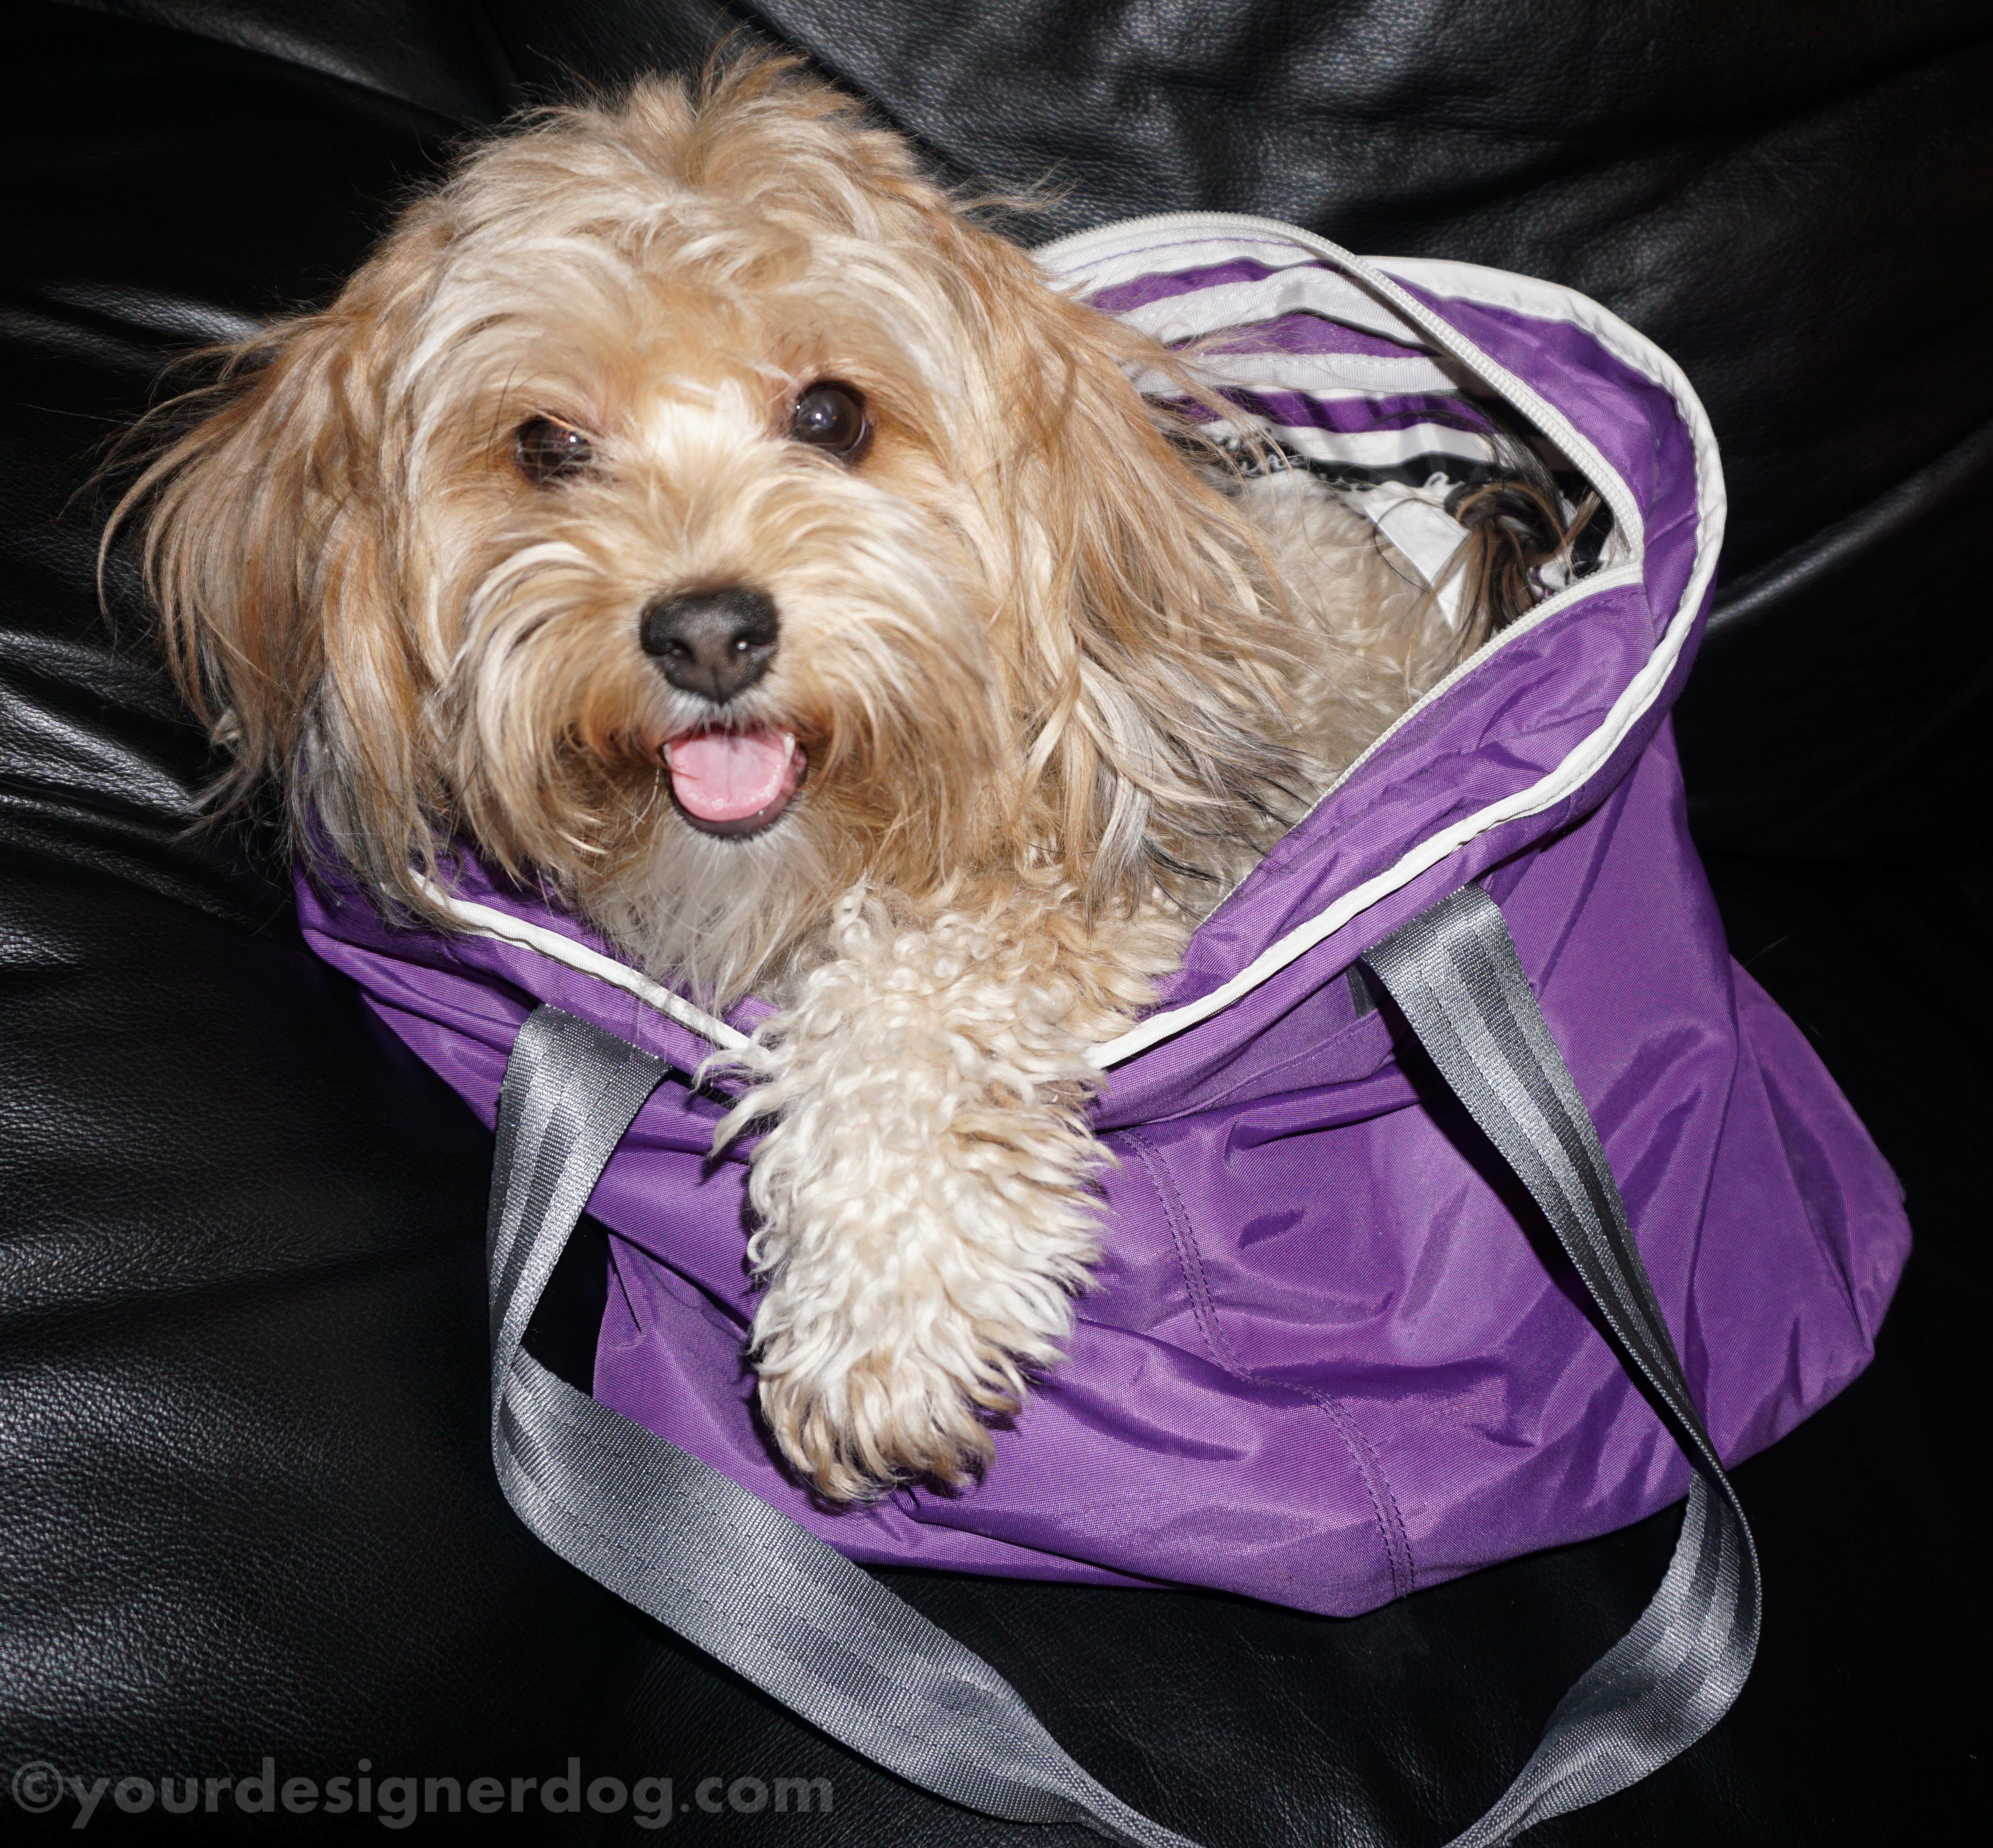 dogs, designer dogs, yorkipoo, yorkie poo, purple, tongue out, diaper bag